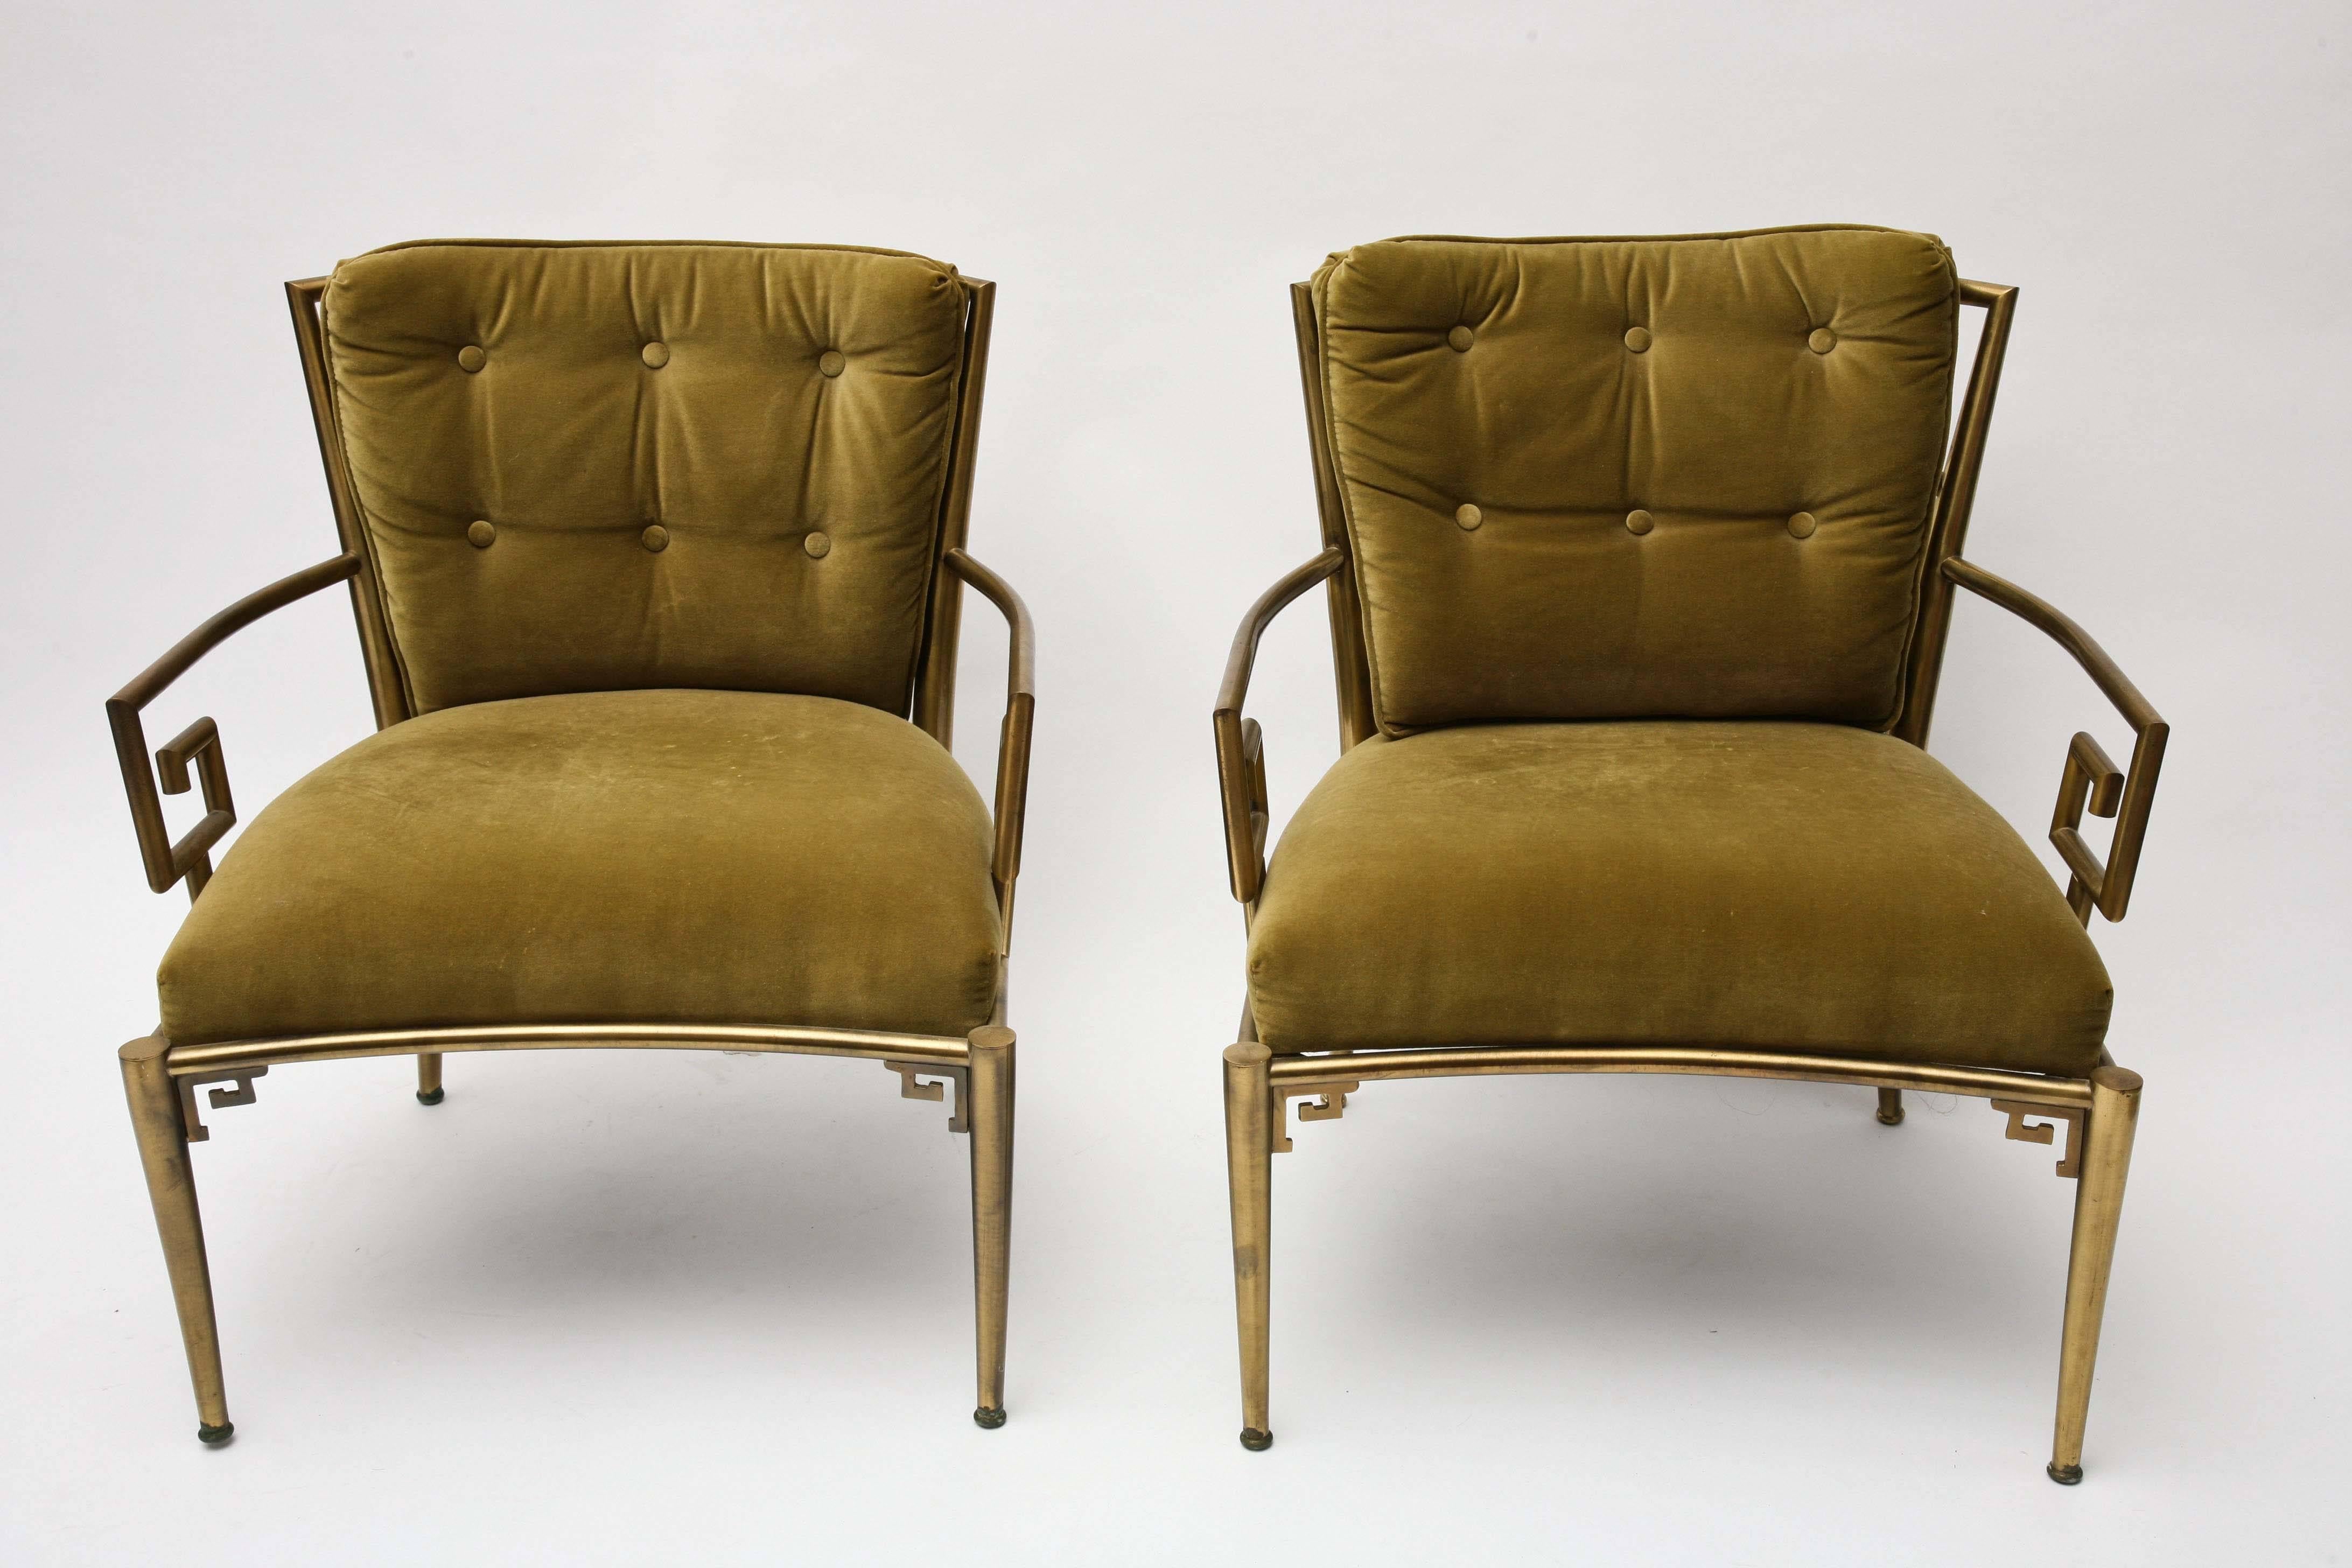 Weiman/Warren Lloyd Chinese lounge chairs. Good size and patina.